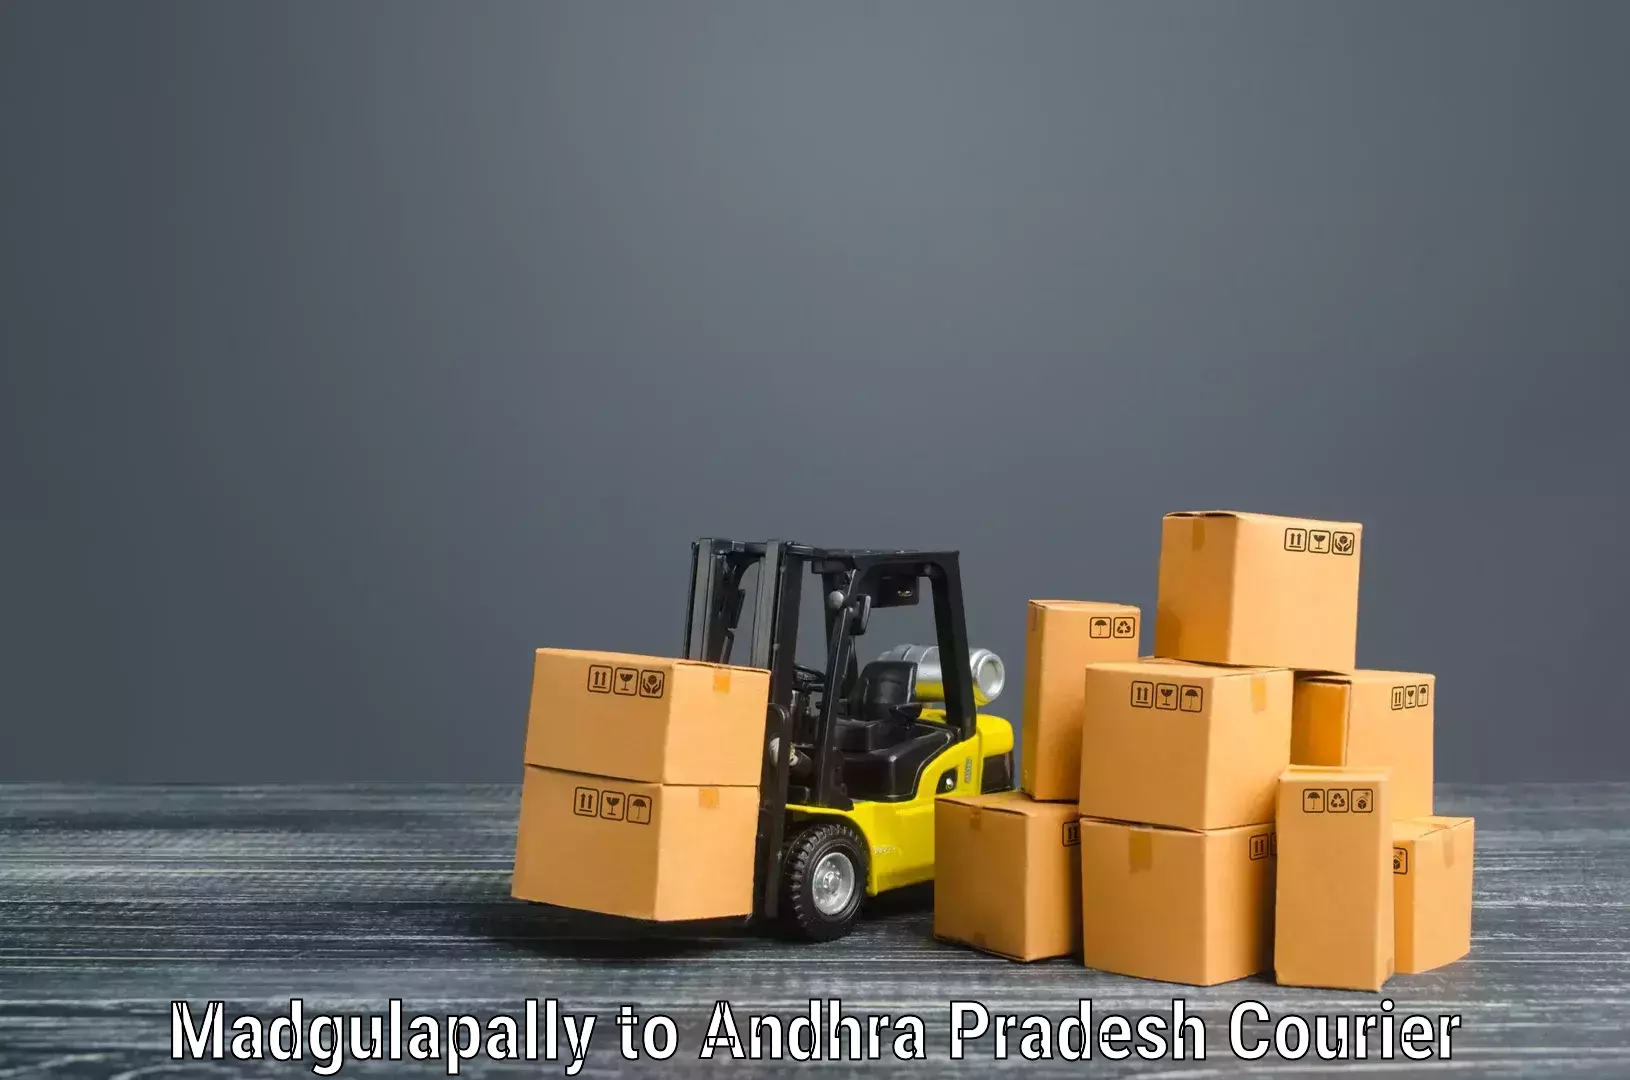 Specialized moving company Madgulapally to Tripuranthakam